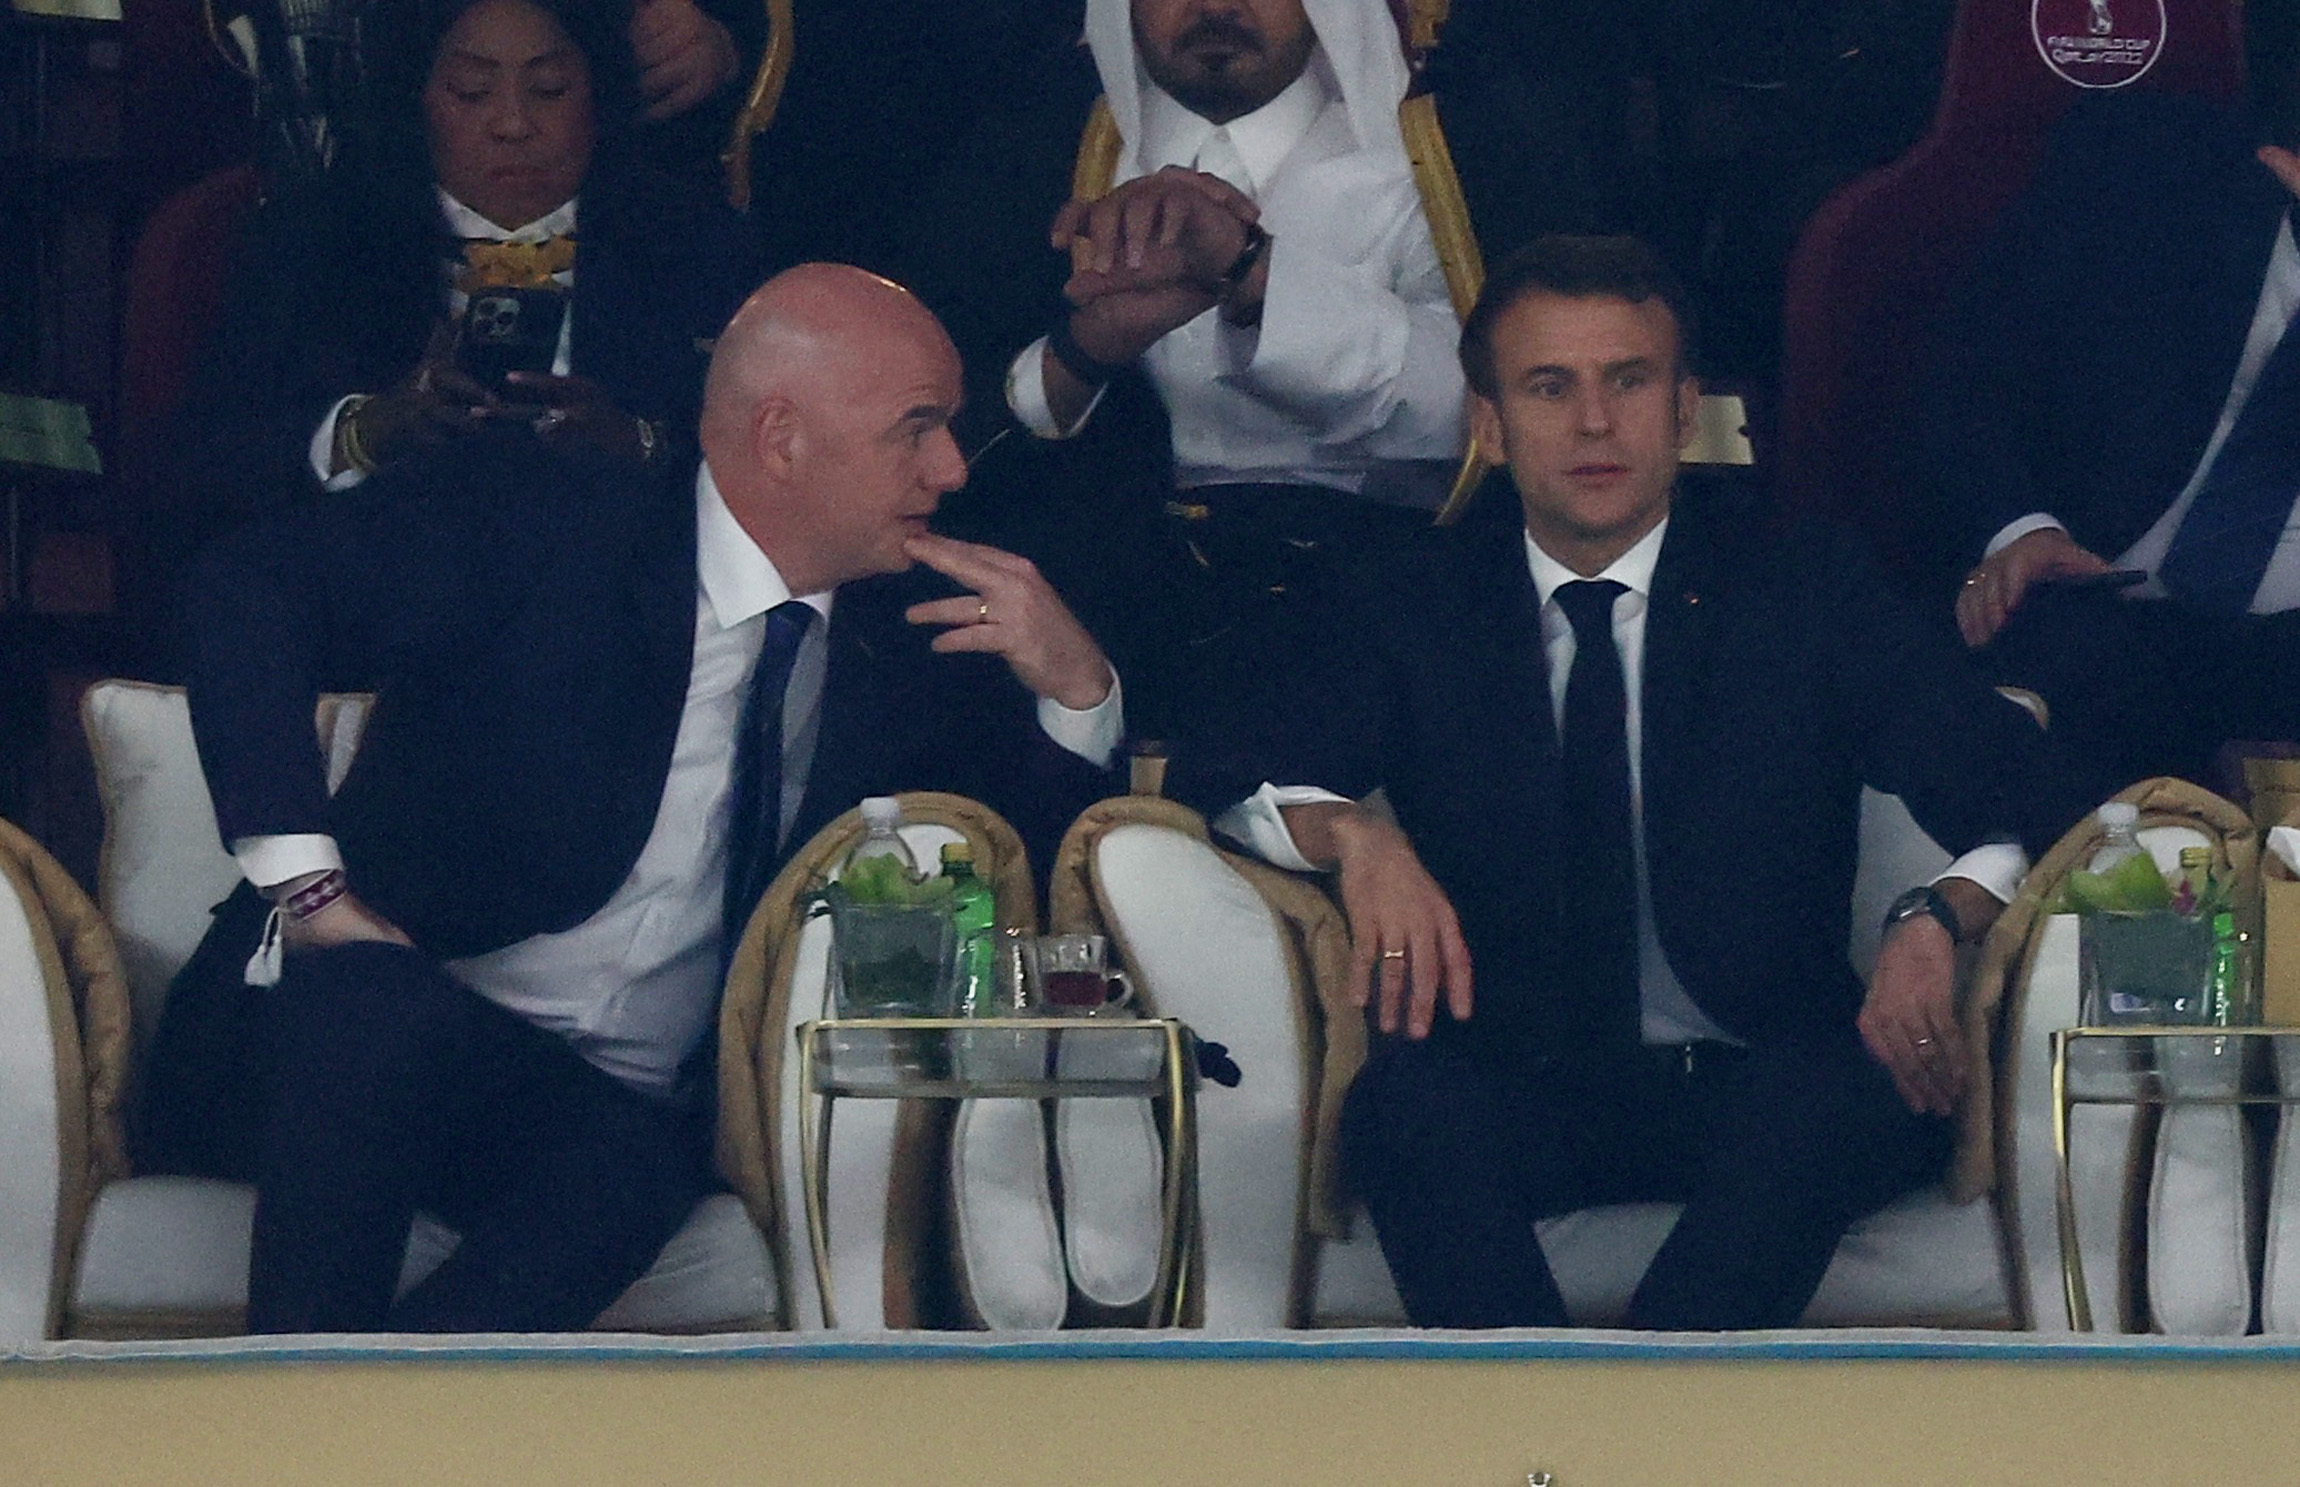 Football Football - FIFA World Cup Qatar 2022 - Final - Argentina - France - Lusail Stadium, Lusail, Qatar - December 18, 2022 FIFA president Gianni Infantino and French President Emmanuel Macron are seen in the stands before the match REUTERS/Lee Smith